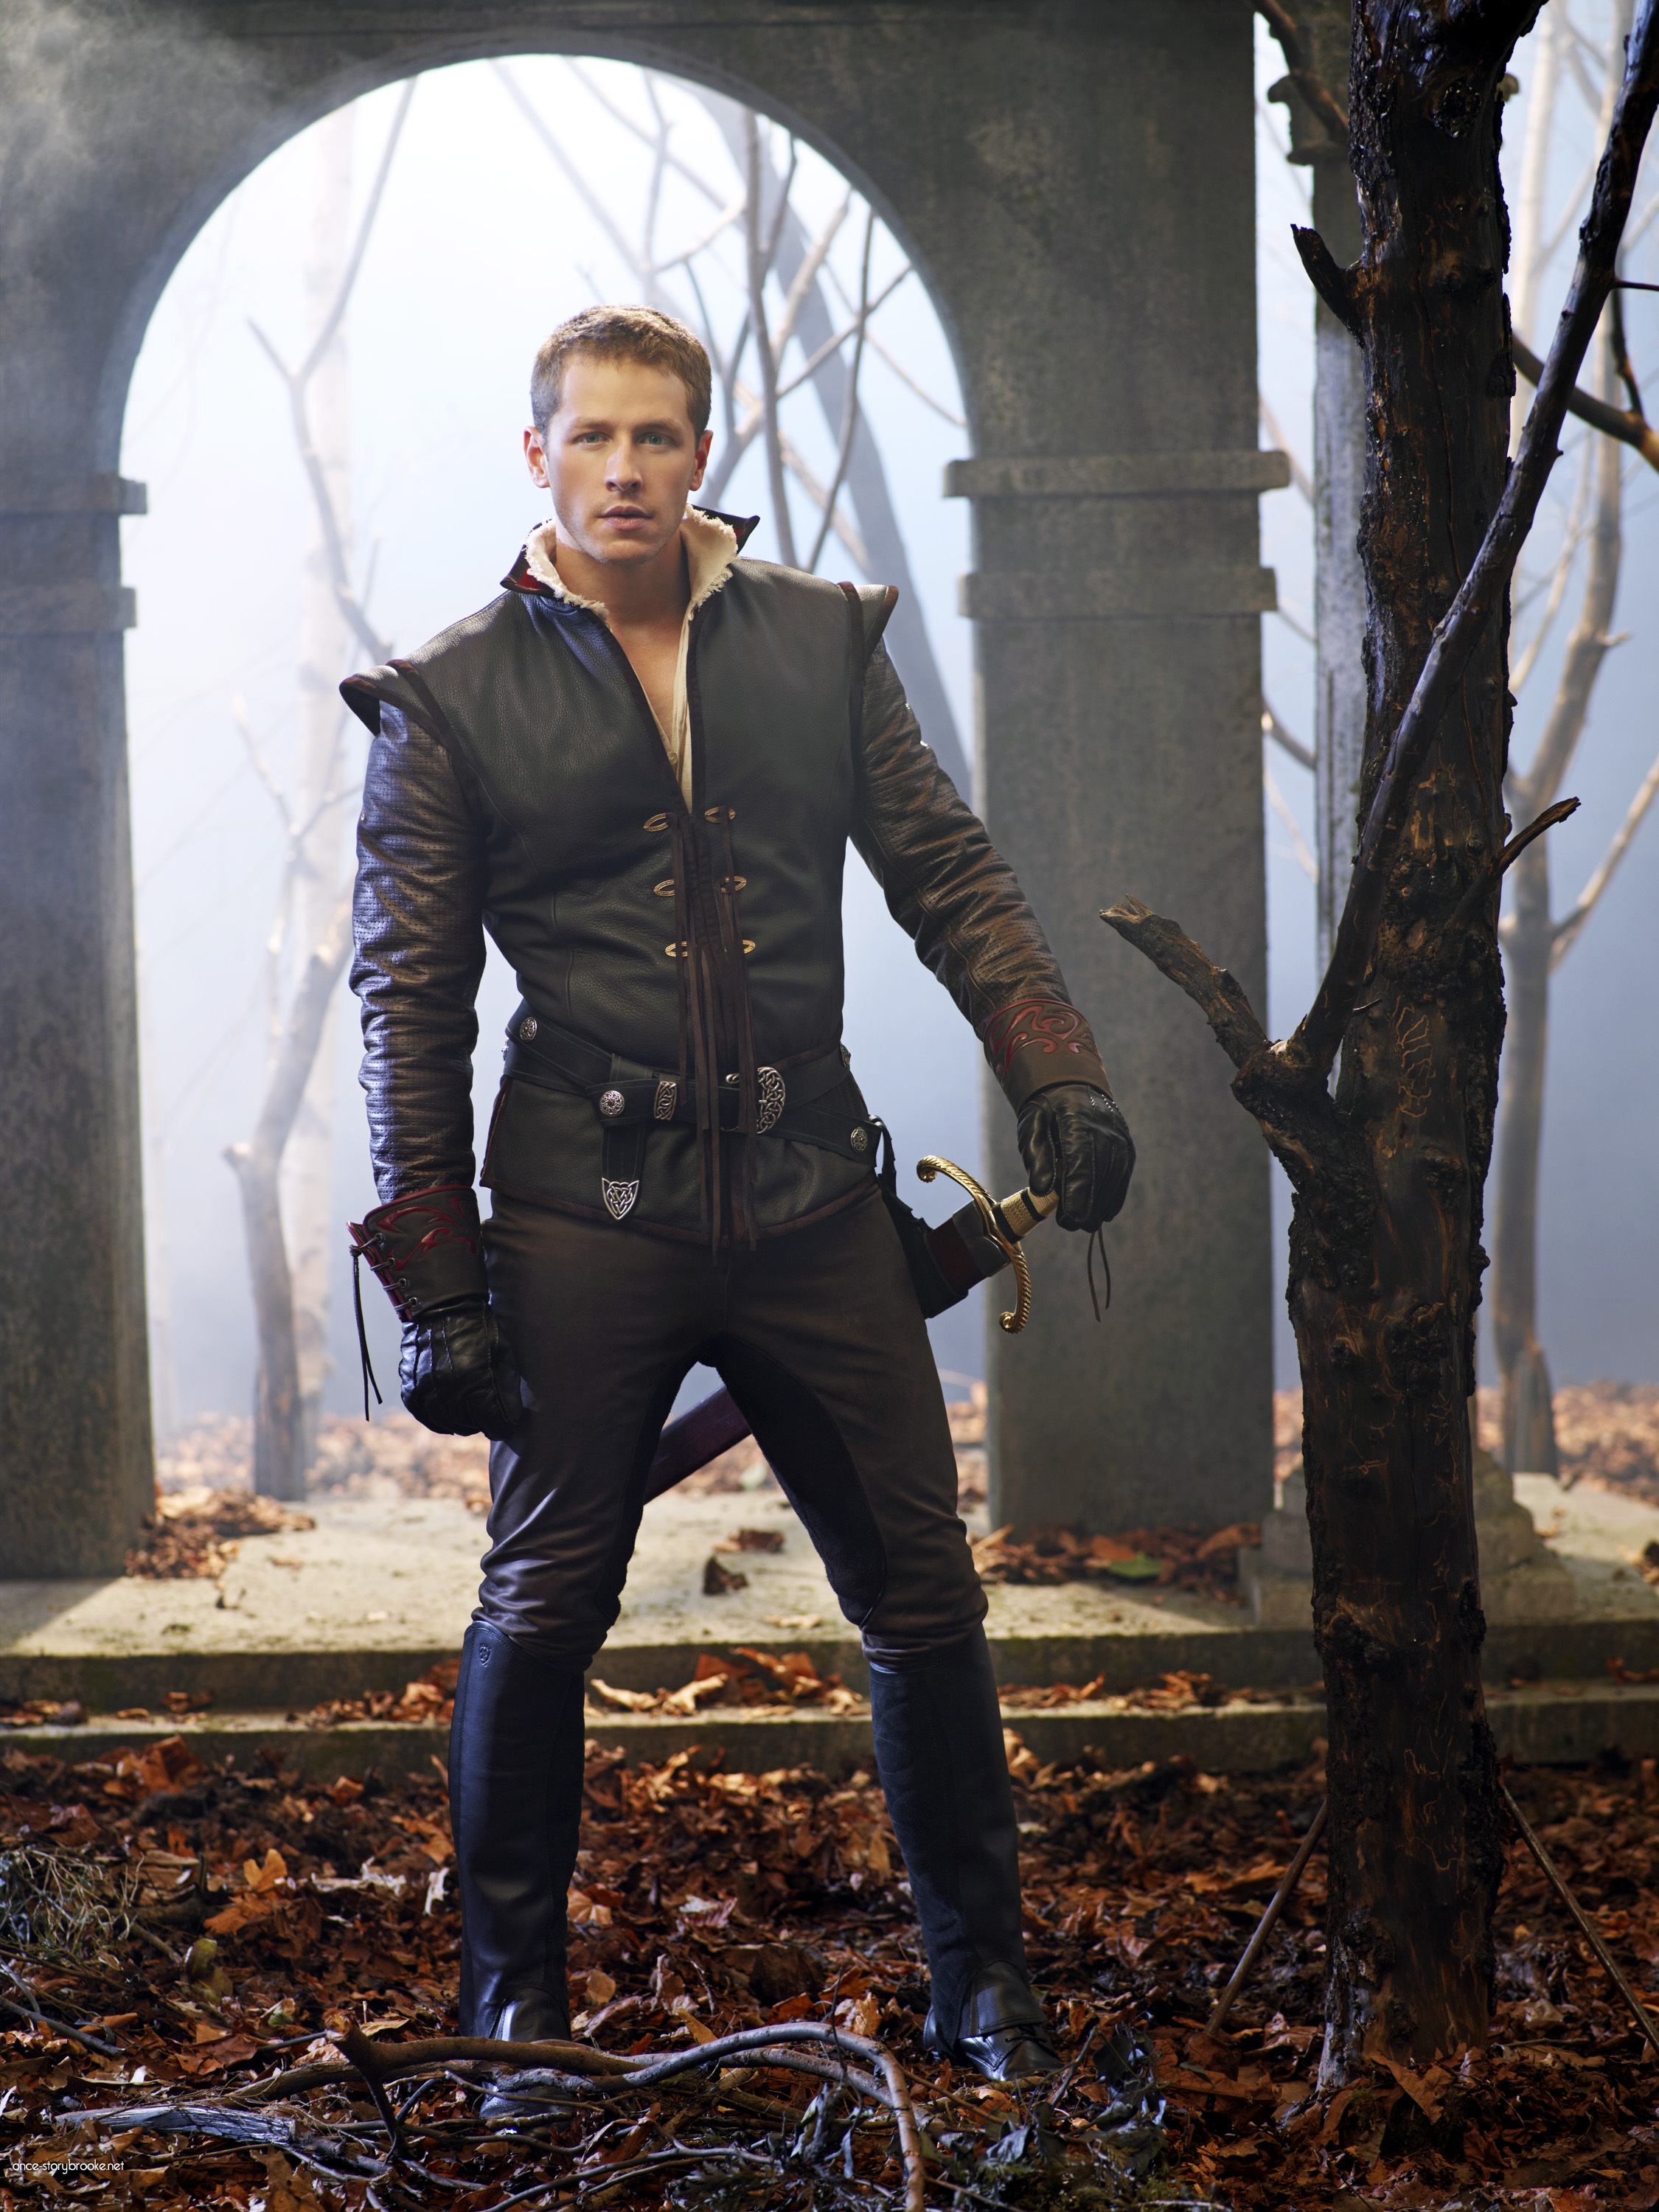 As Prince Charming in Once Upon A Time.